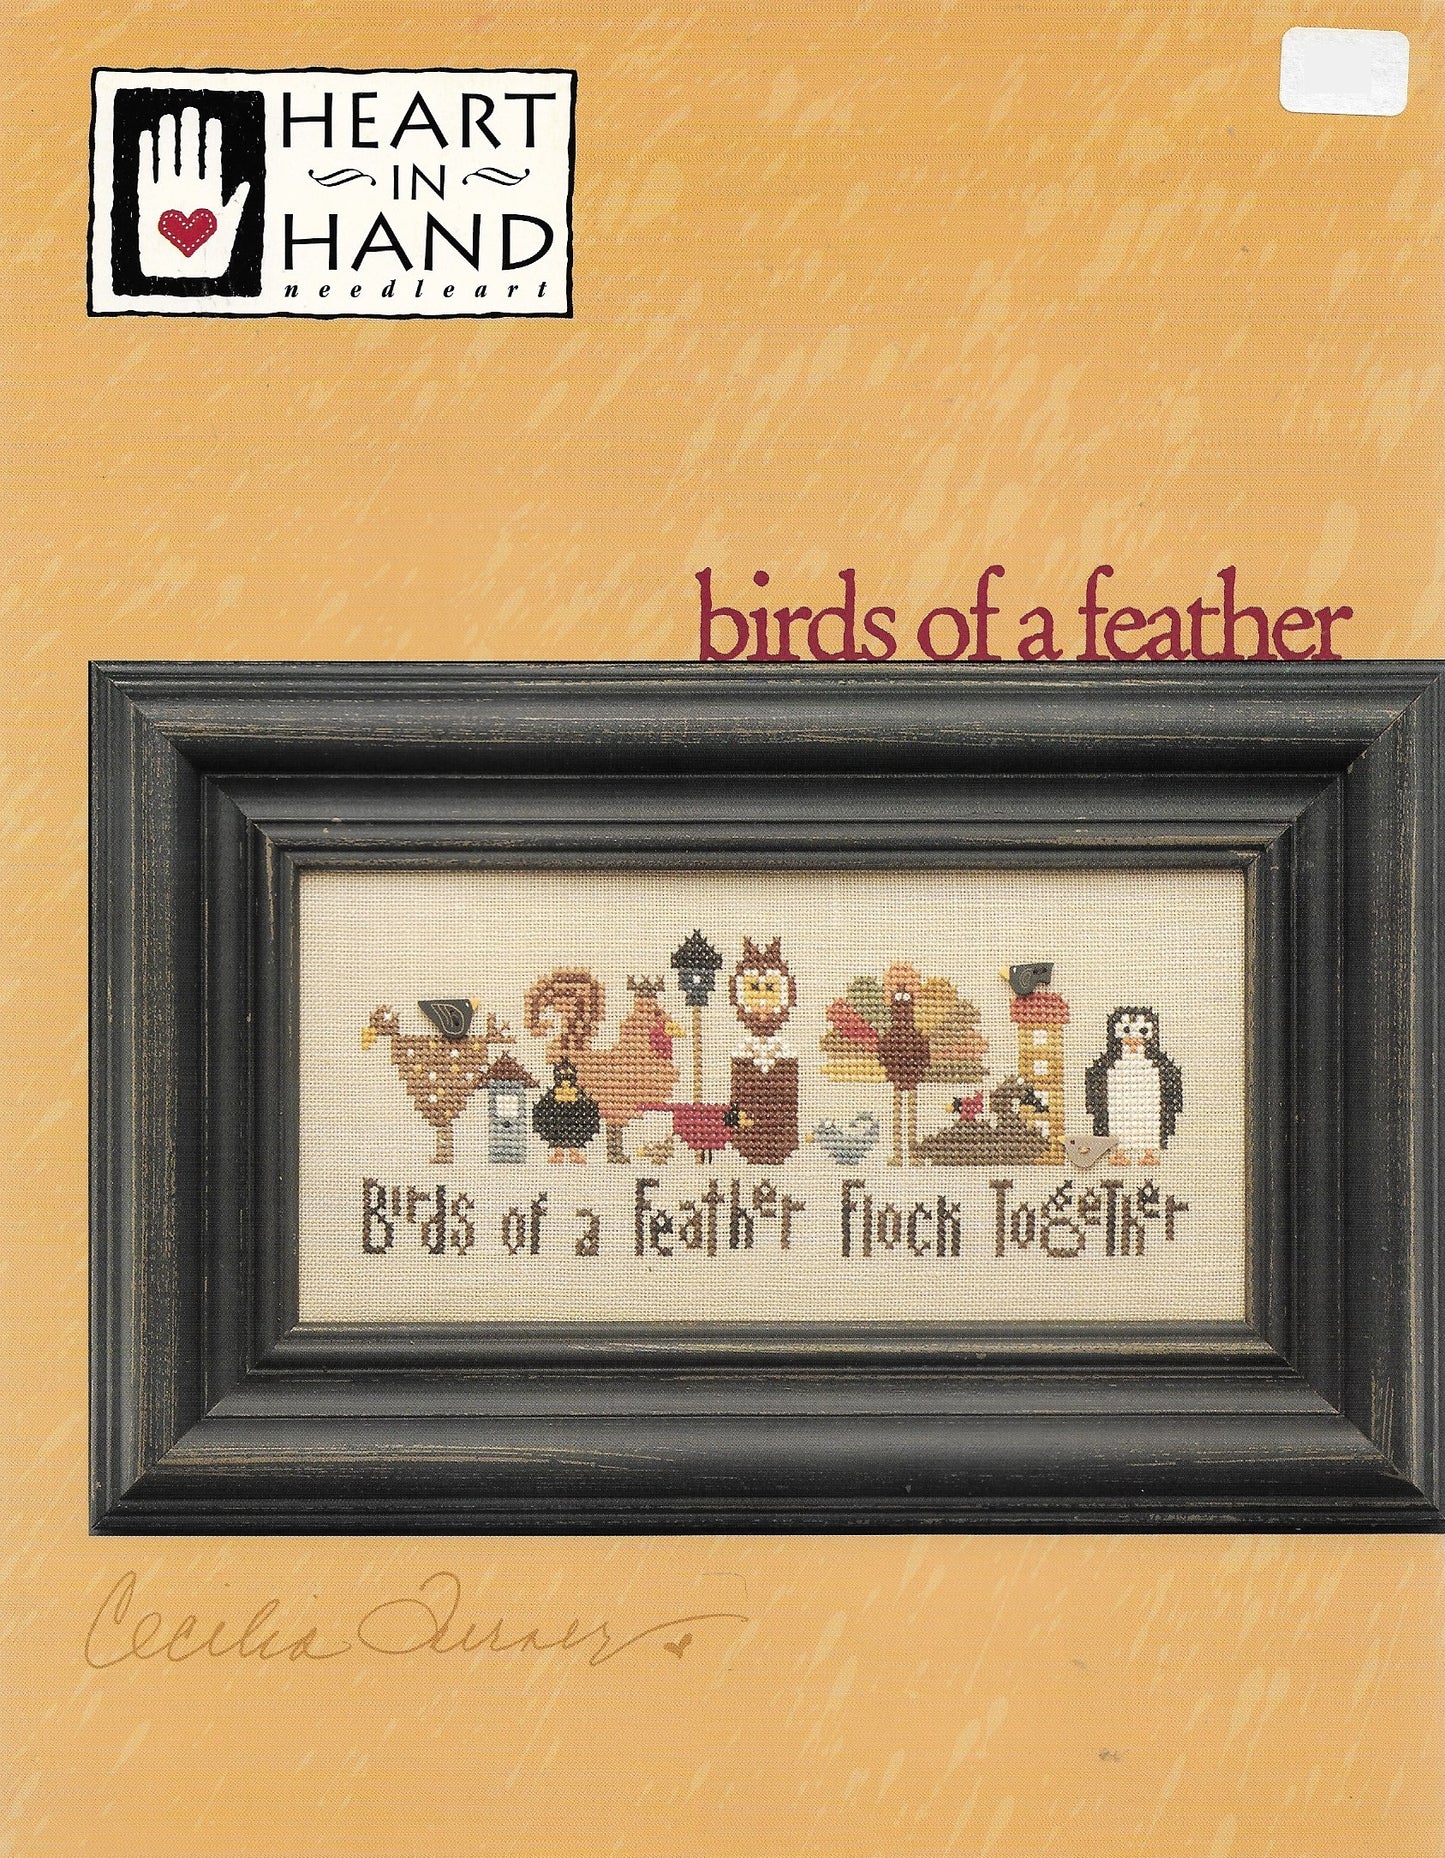 Heart in Hand Birds of a Feather cross stitch pattern